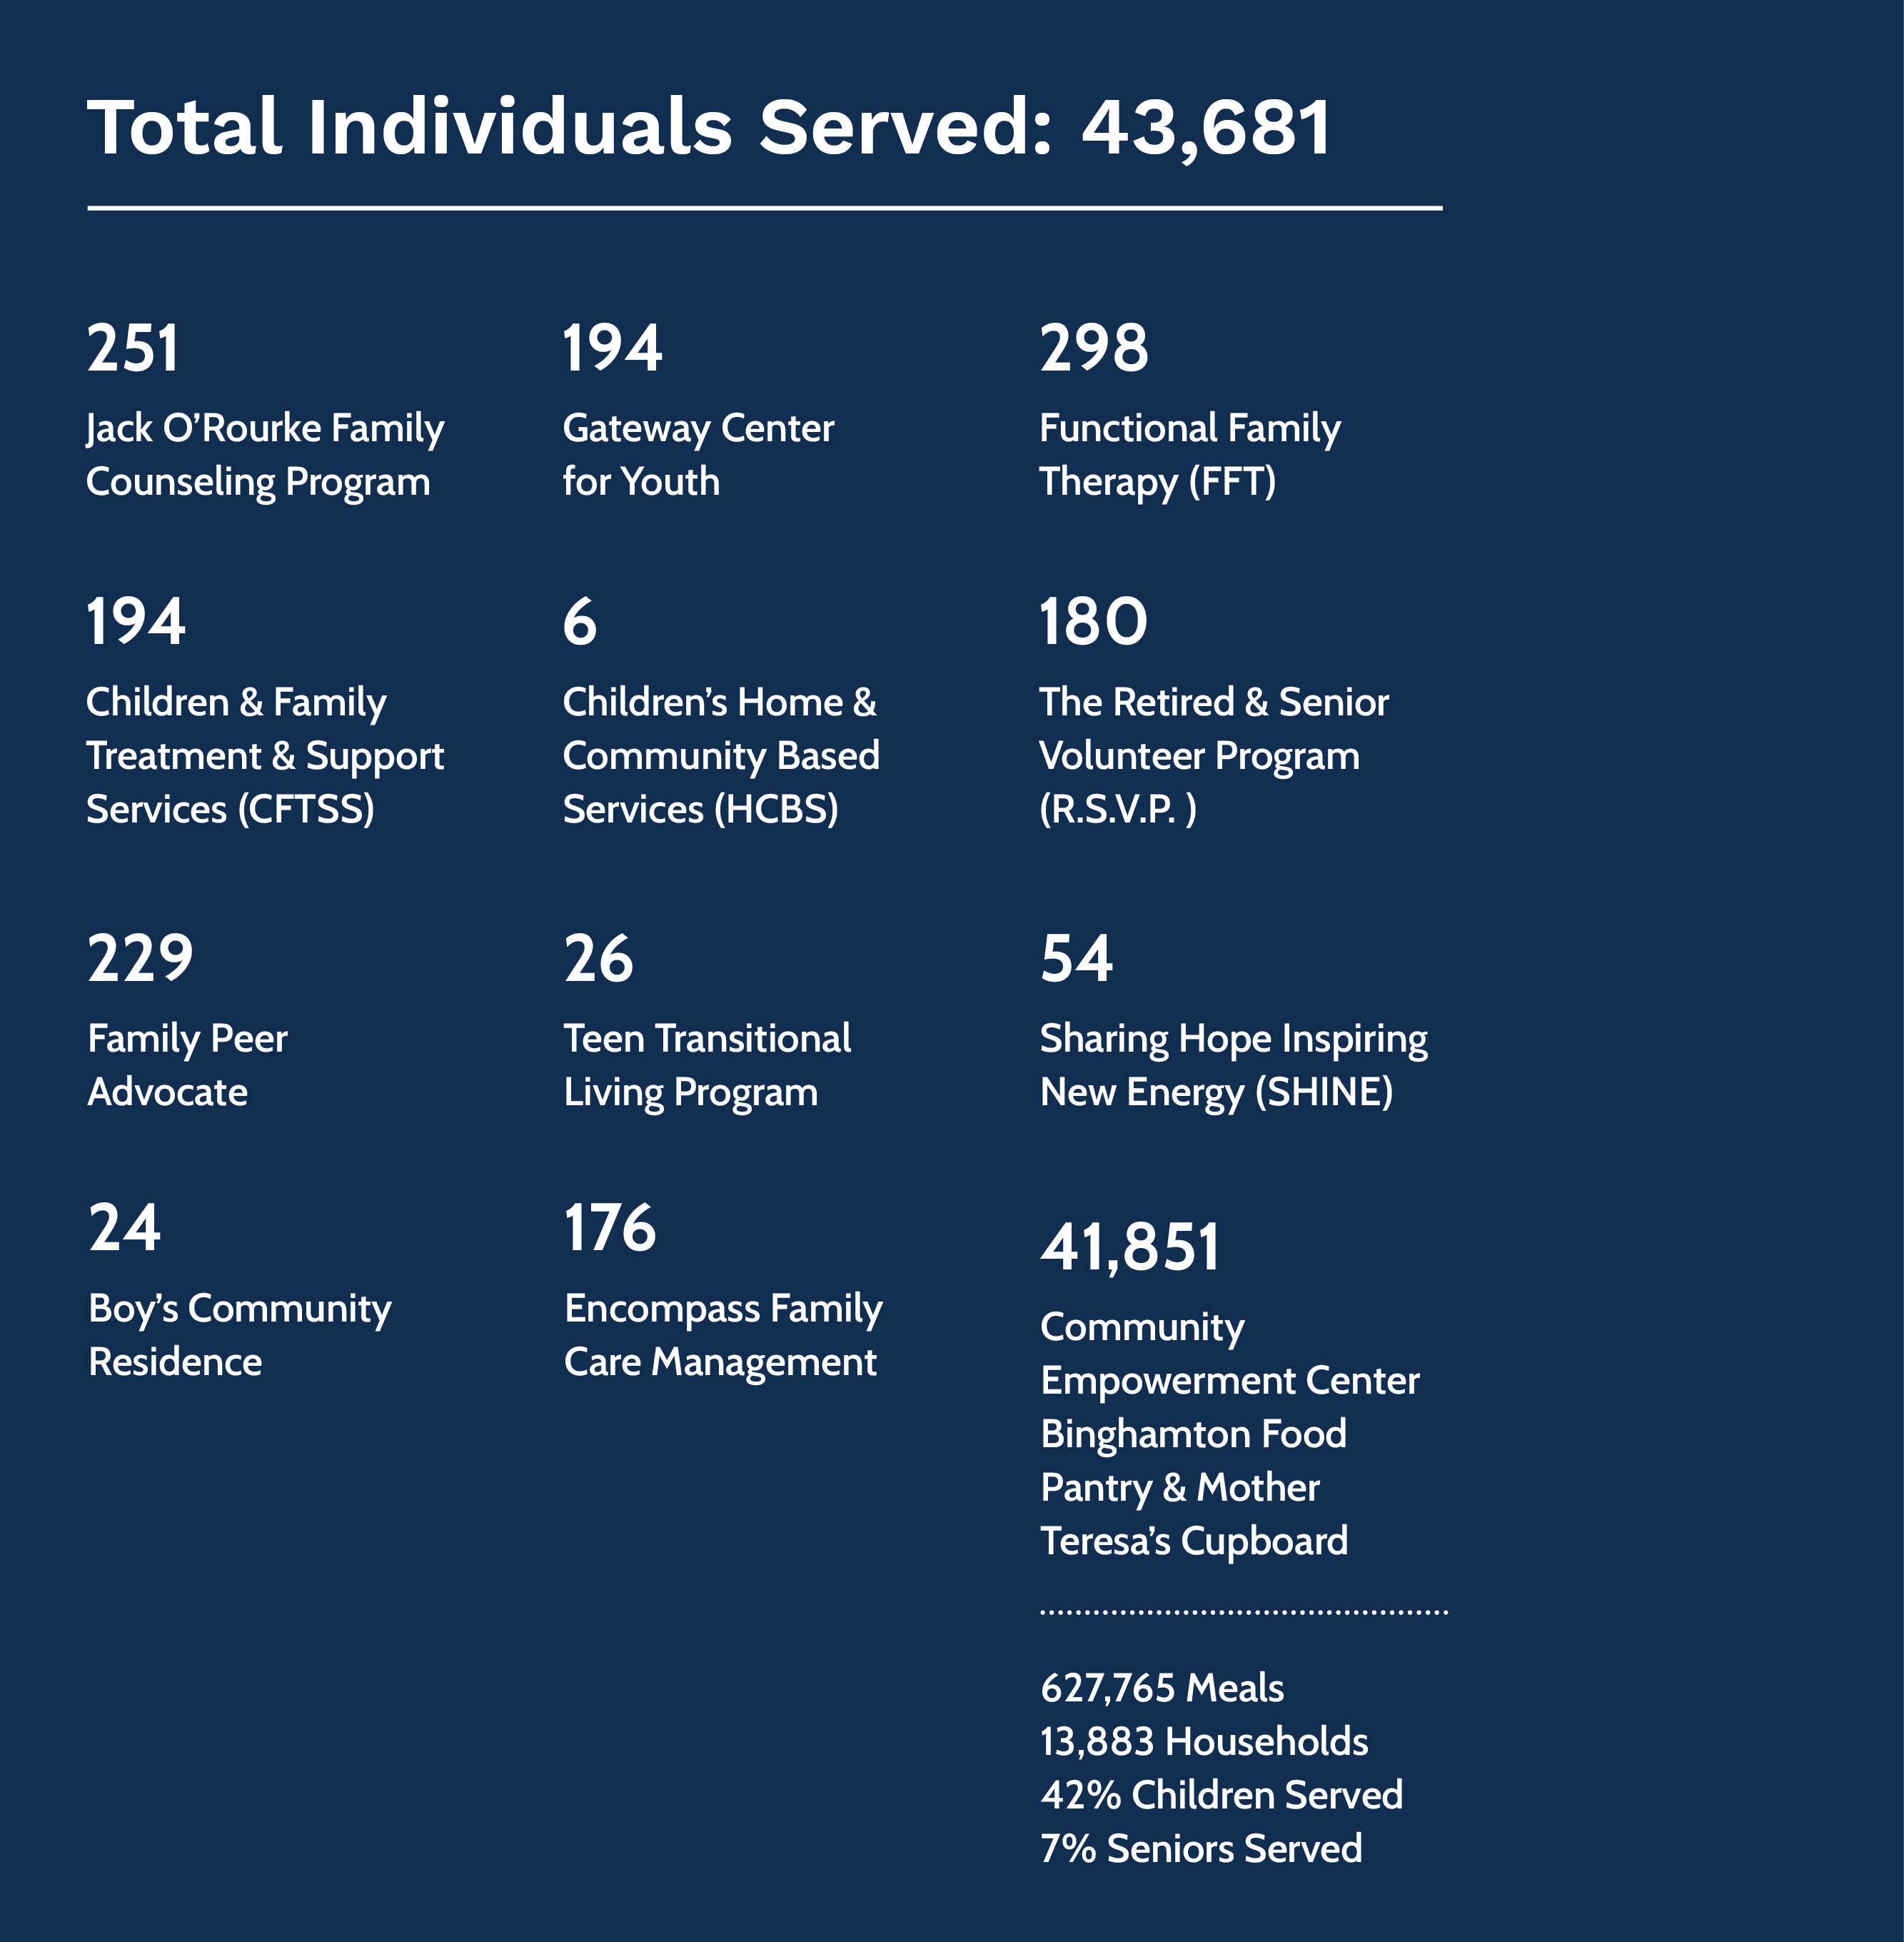 Total individuals served by Youth, Family, Community Services = 43,681; Jack O’Rourke Family Counseling Program = 251; Gateway Center for Youth = 194; Functional Family Therapy = 298; Children and Family Treatment Support Services = 194; Children's Home a